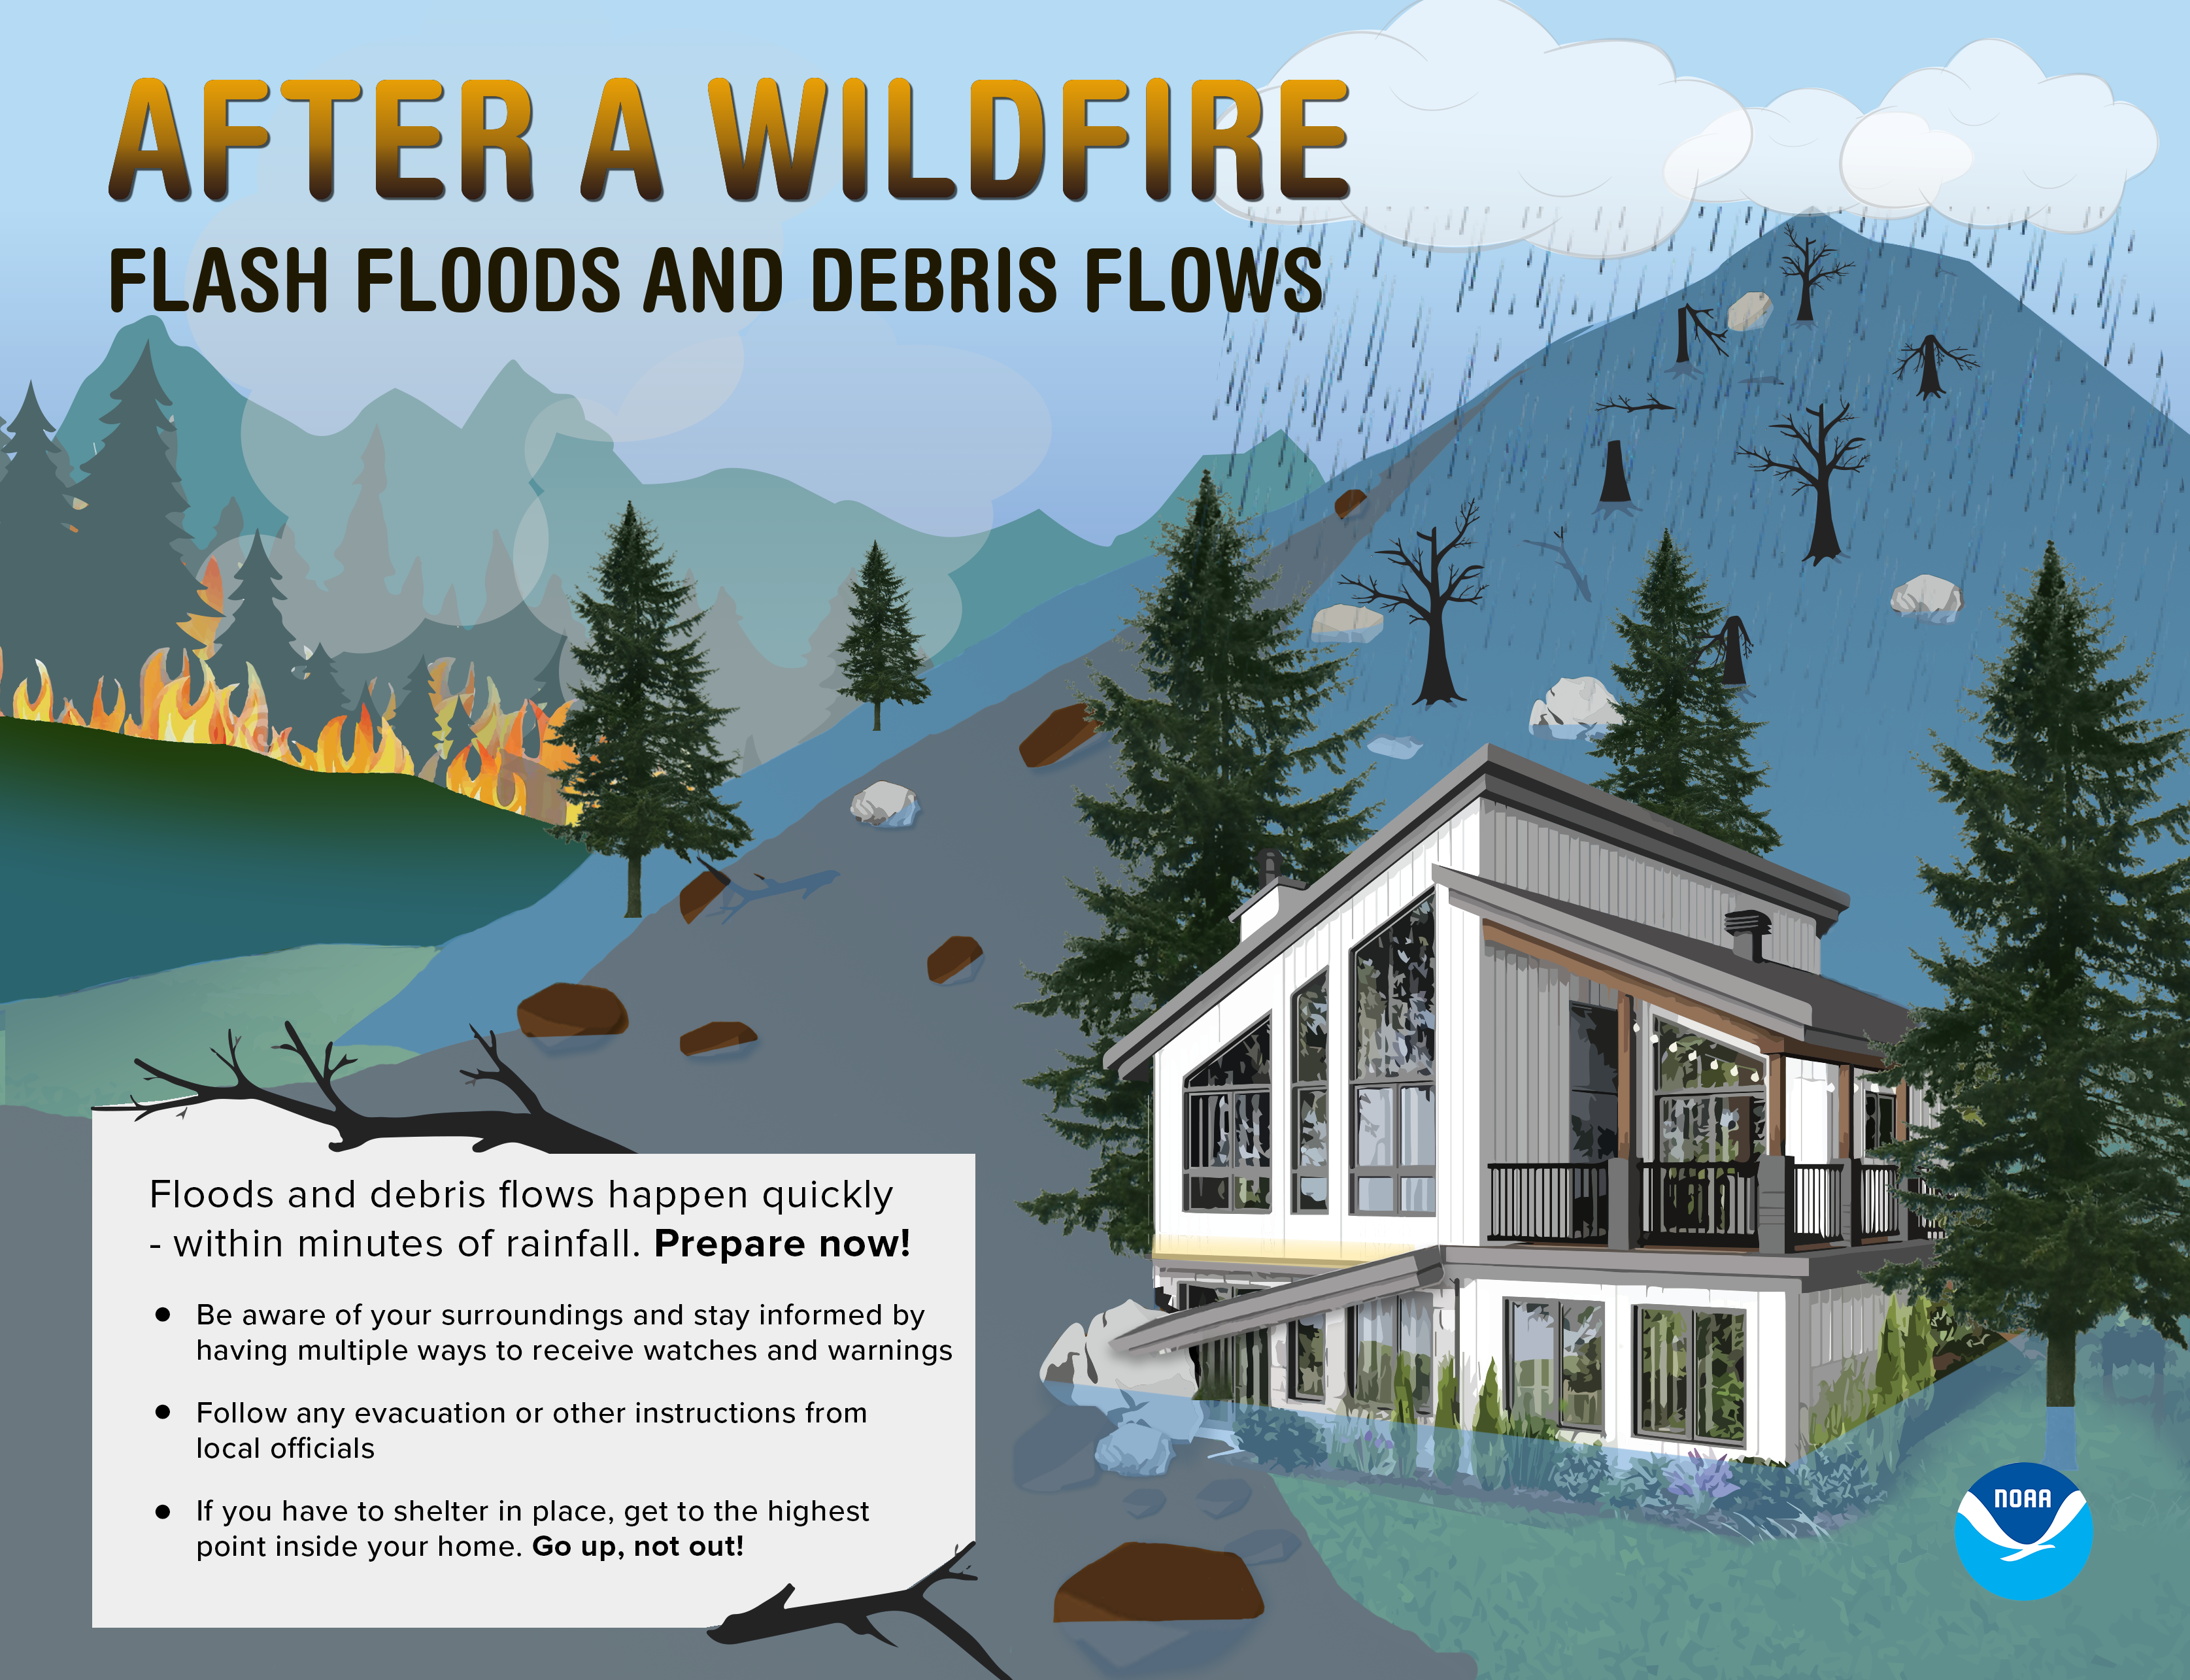 After a wildfire: flash floos and debris flows. Floods and debris flows happen quickly after rainfall. Prepare now! Be aware of your surroundings and stay informed by having multiple ways to receive watches and warnings. Follow any evacuation or other instructions from local officials. If you have to shelter in place, get to the highest point inside your home. Go up, not out!